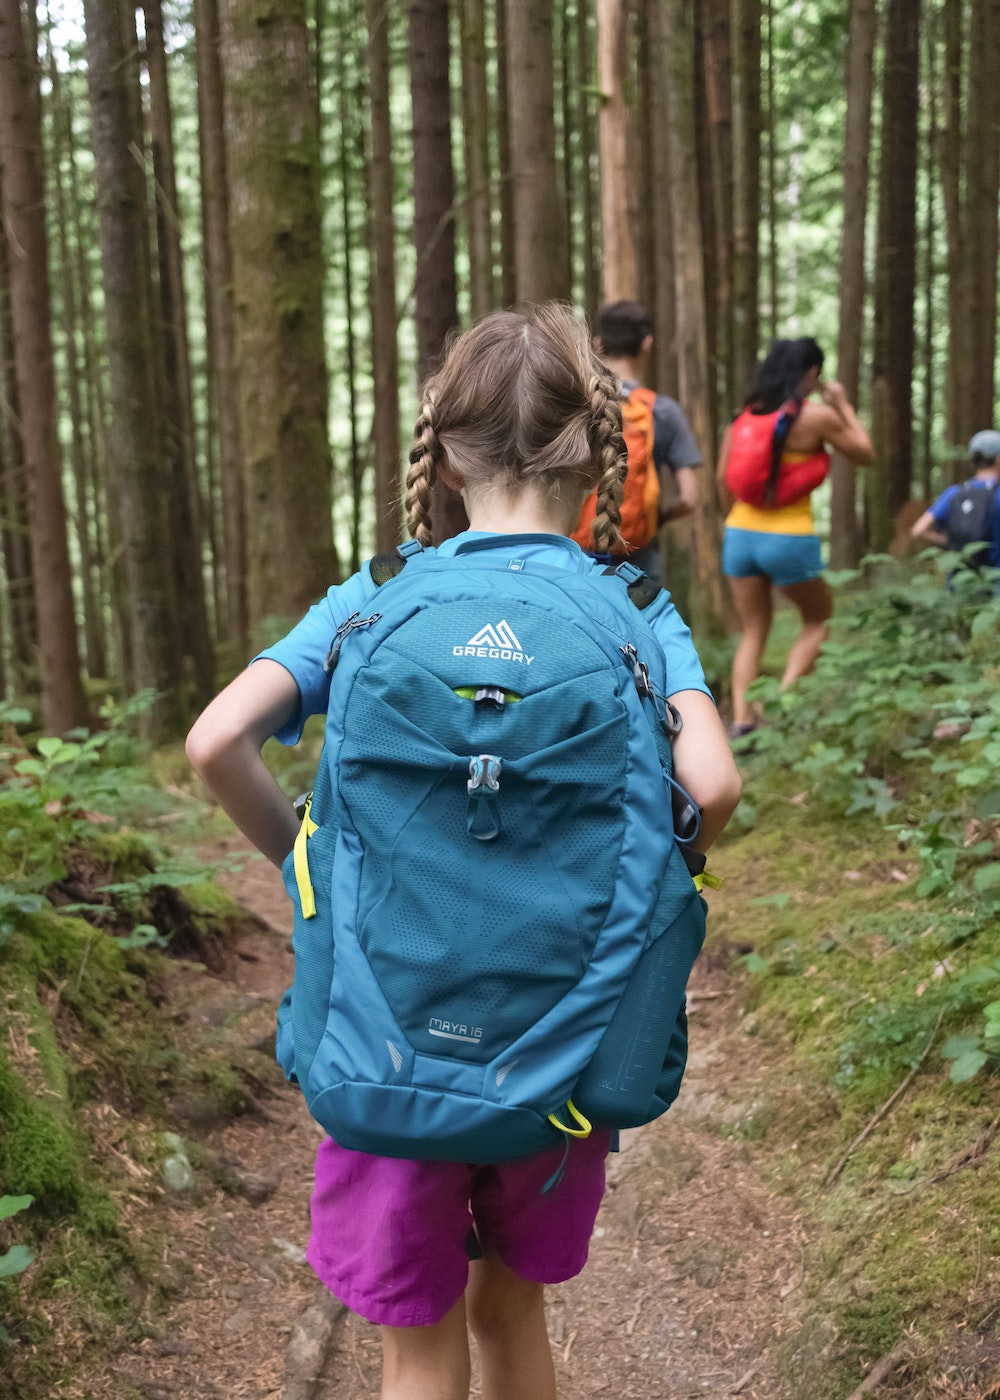 Little girl with two braids in pink shorts, blue t-shirt, carrying a blue Greggory backpack following behind a line of people in the woods